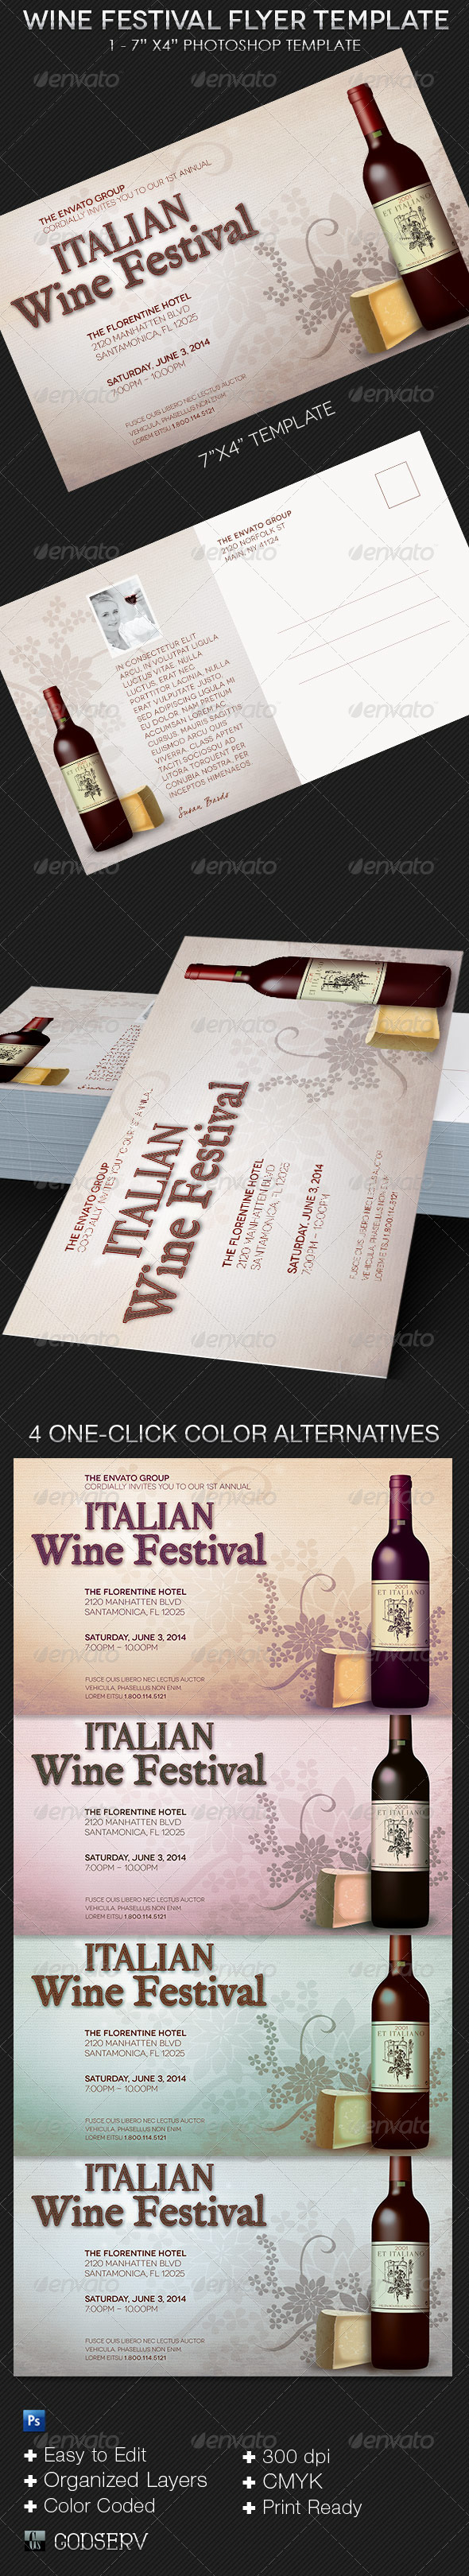 Wine Tasting Flyer Template from previews.customer.envatousercontent.com